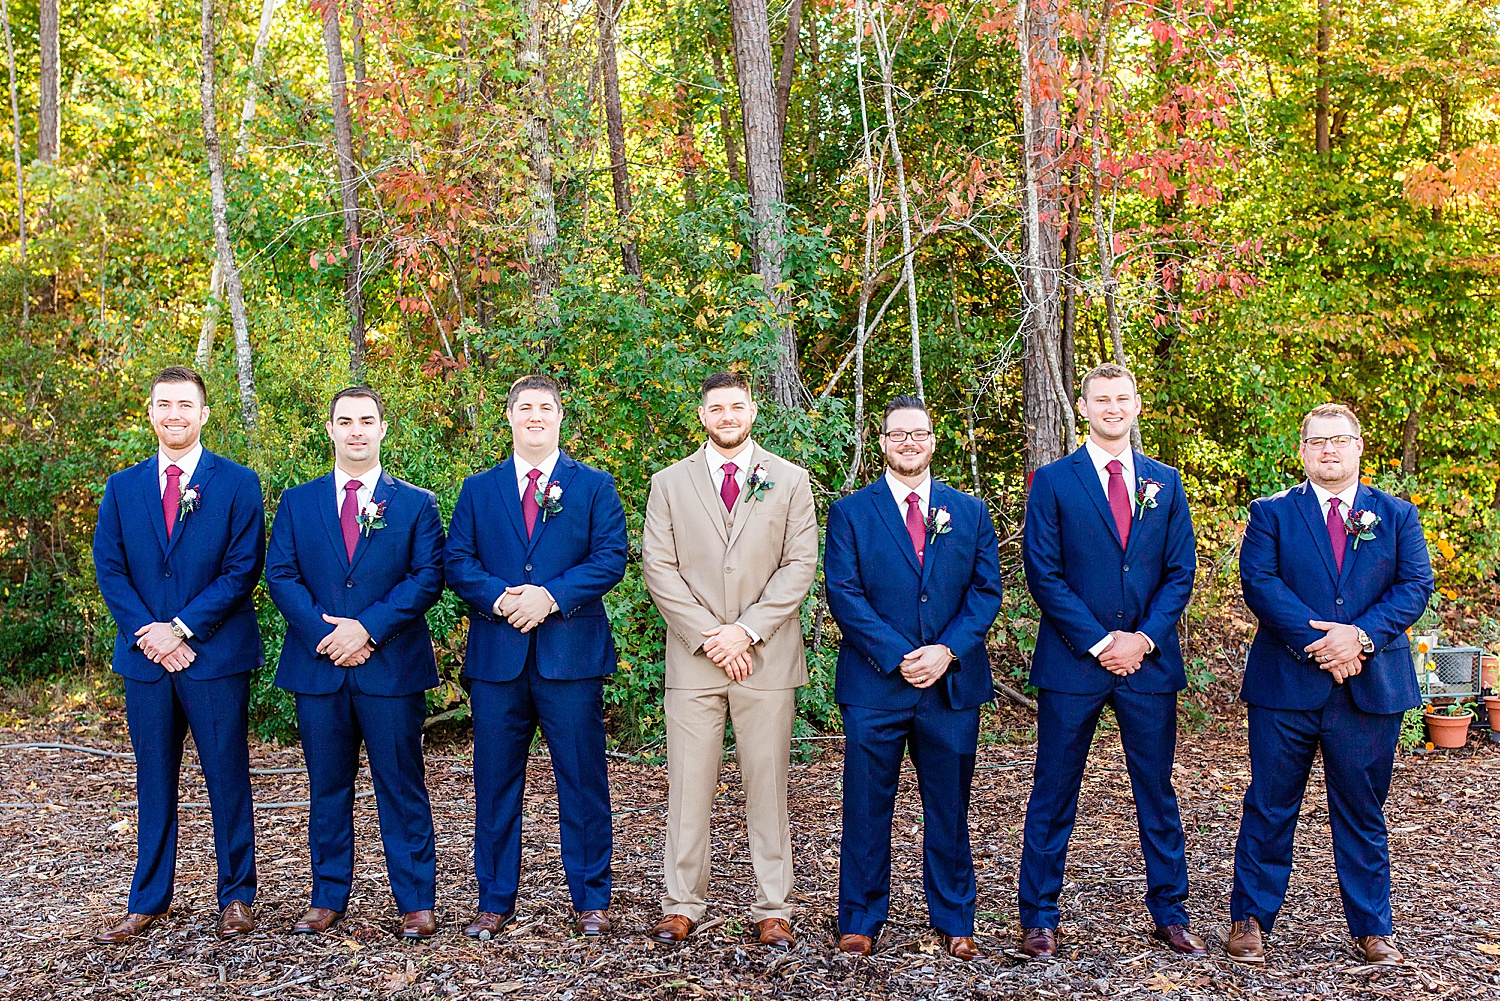 Groom and Groomsmen stand together after wedding ceremony